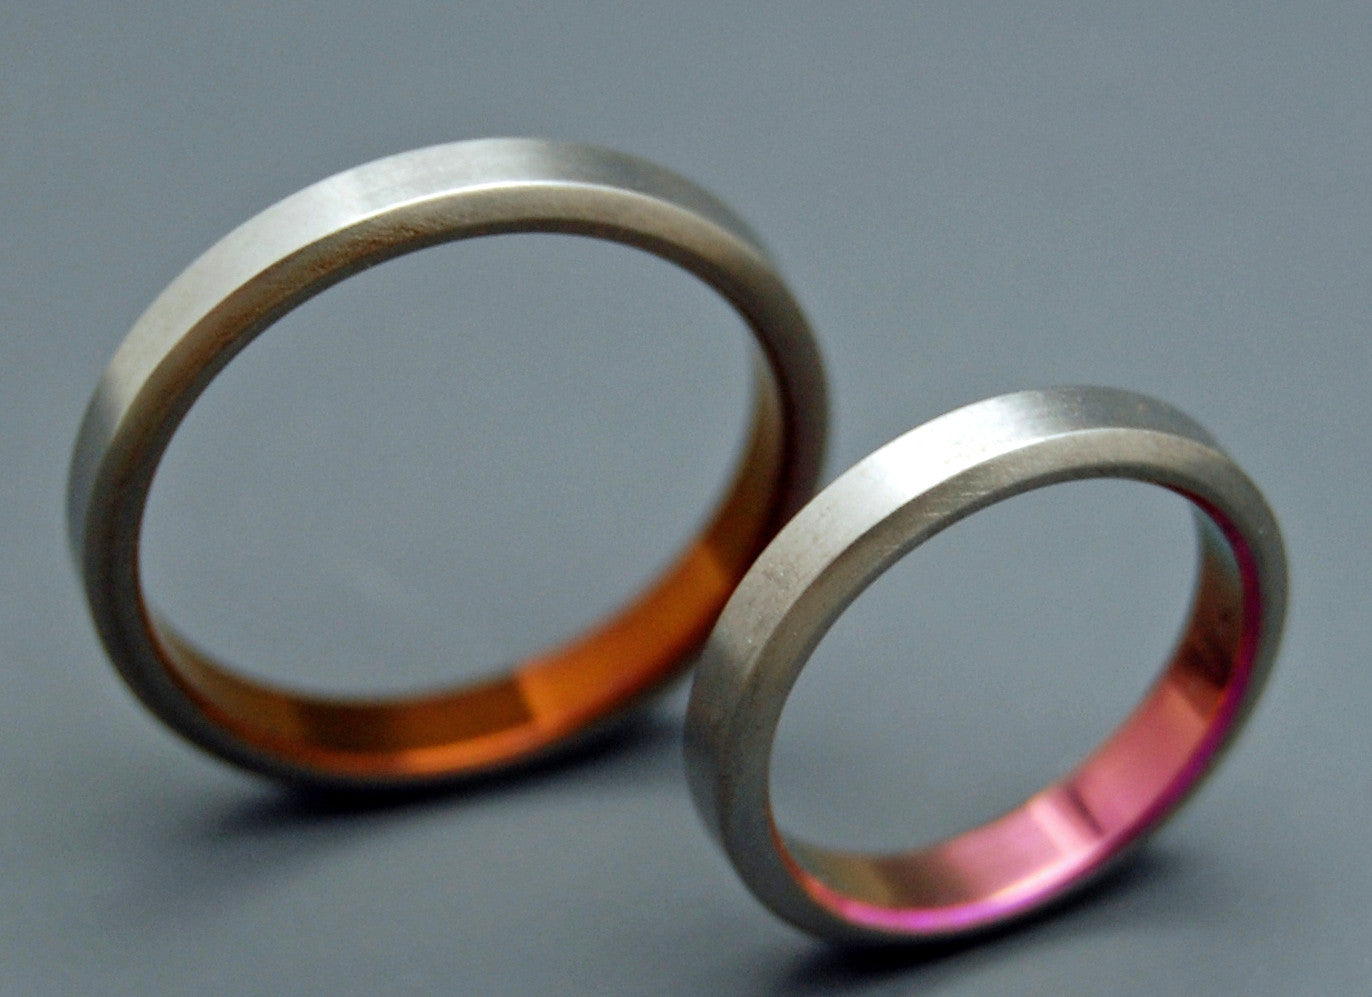 CINNAMON & SPICE | Bronze & Pink Anodized Titanium Wedding Rings - His & Hers Wedding Band Set - Minter and Richter Designs